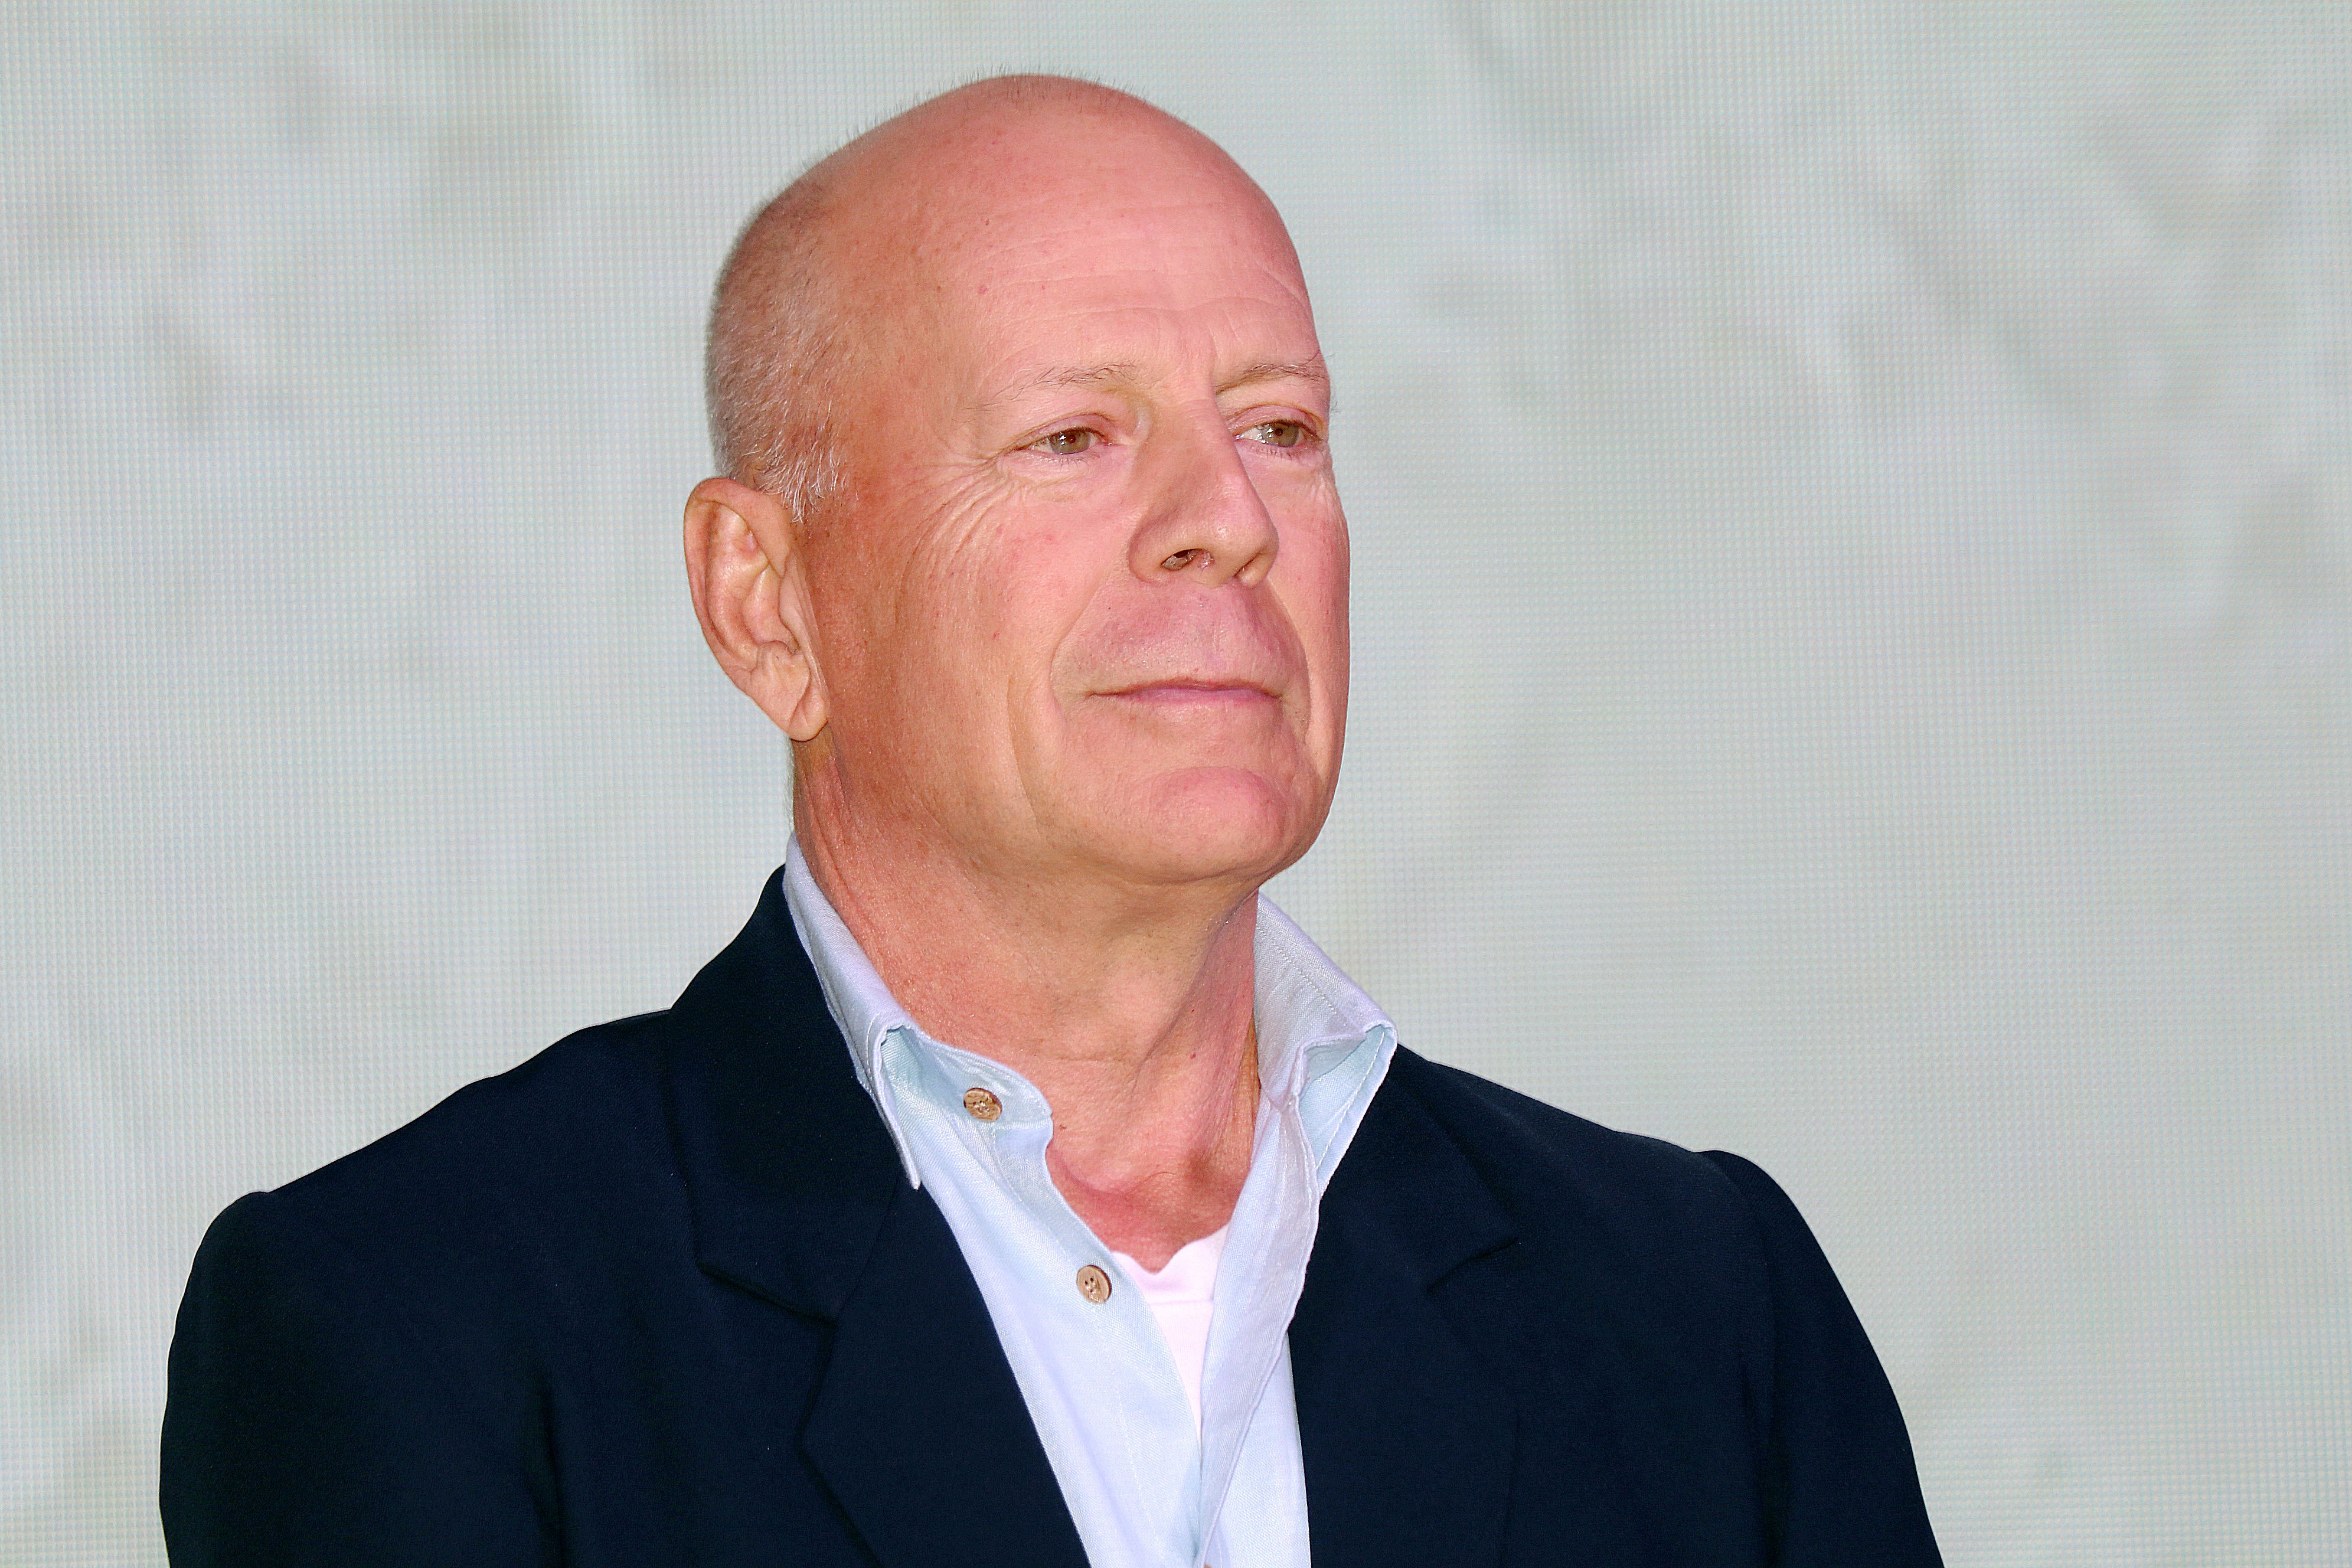 Bruce Willis during the CocoBaba and Ushopal activity on November 4, 2019 in Shanghai, China. / Source: Getty Images